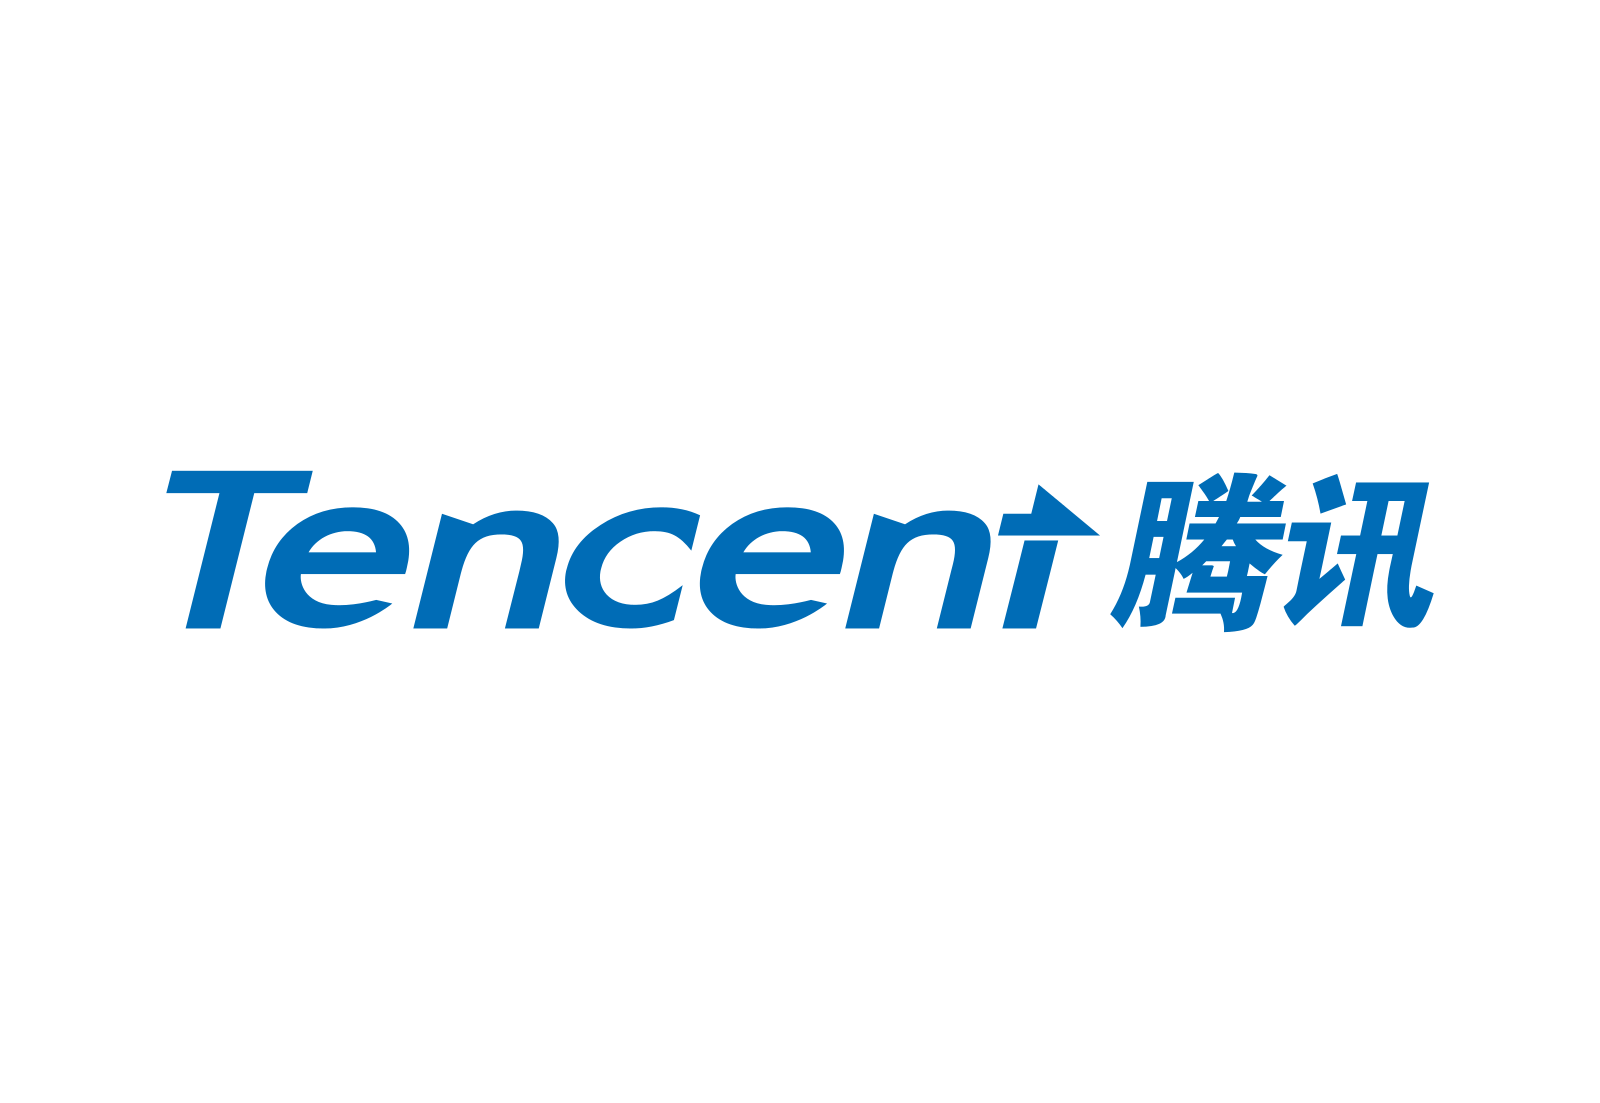 Tencent Signs Deals With Ubisoft and Lego